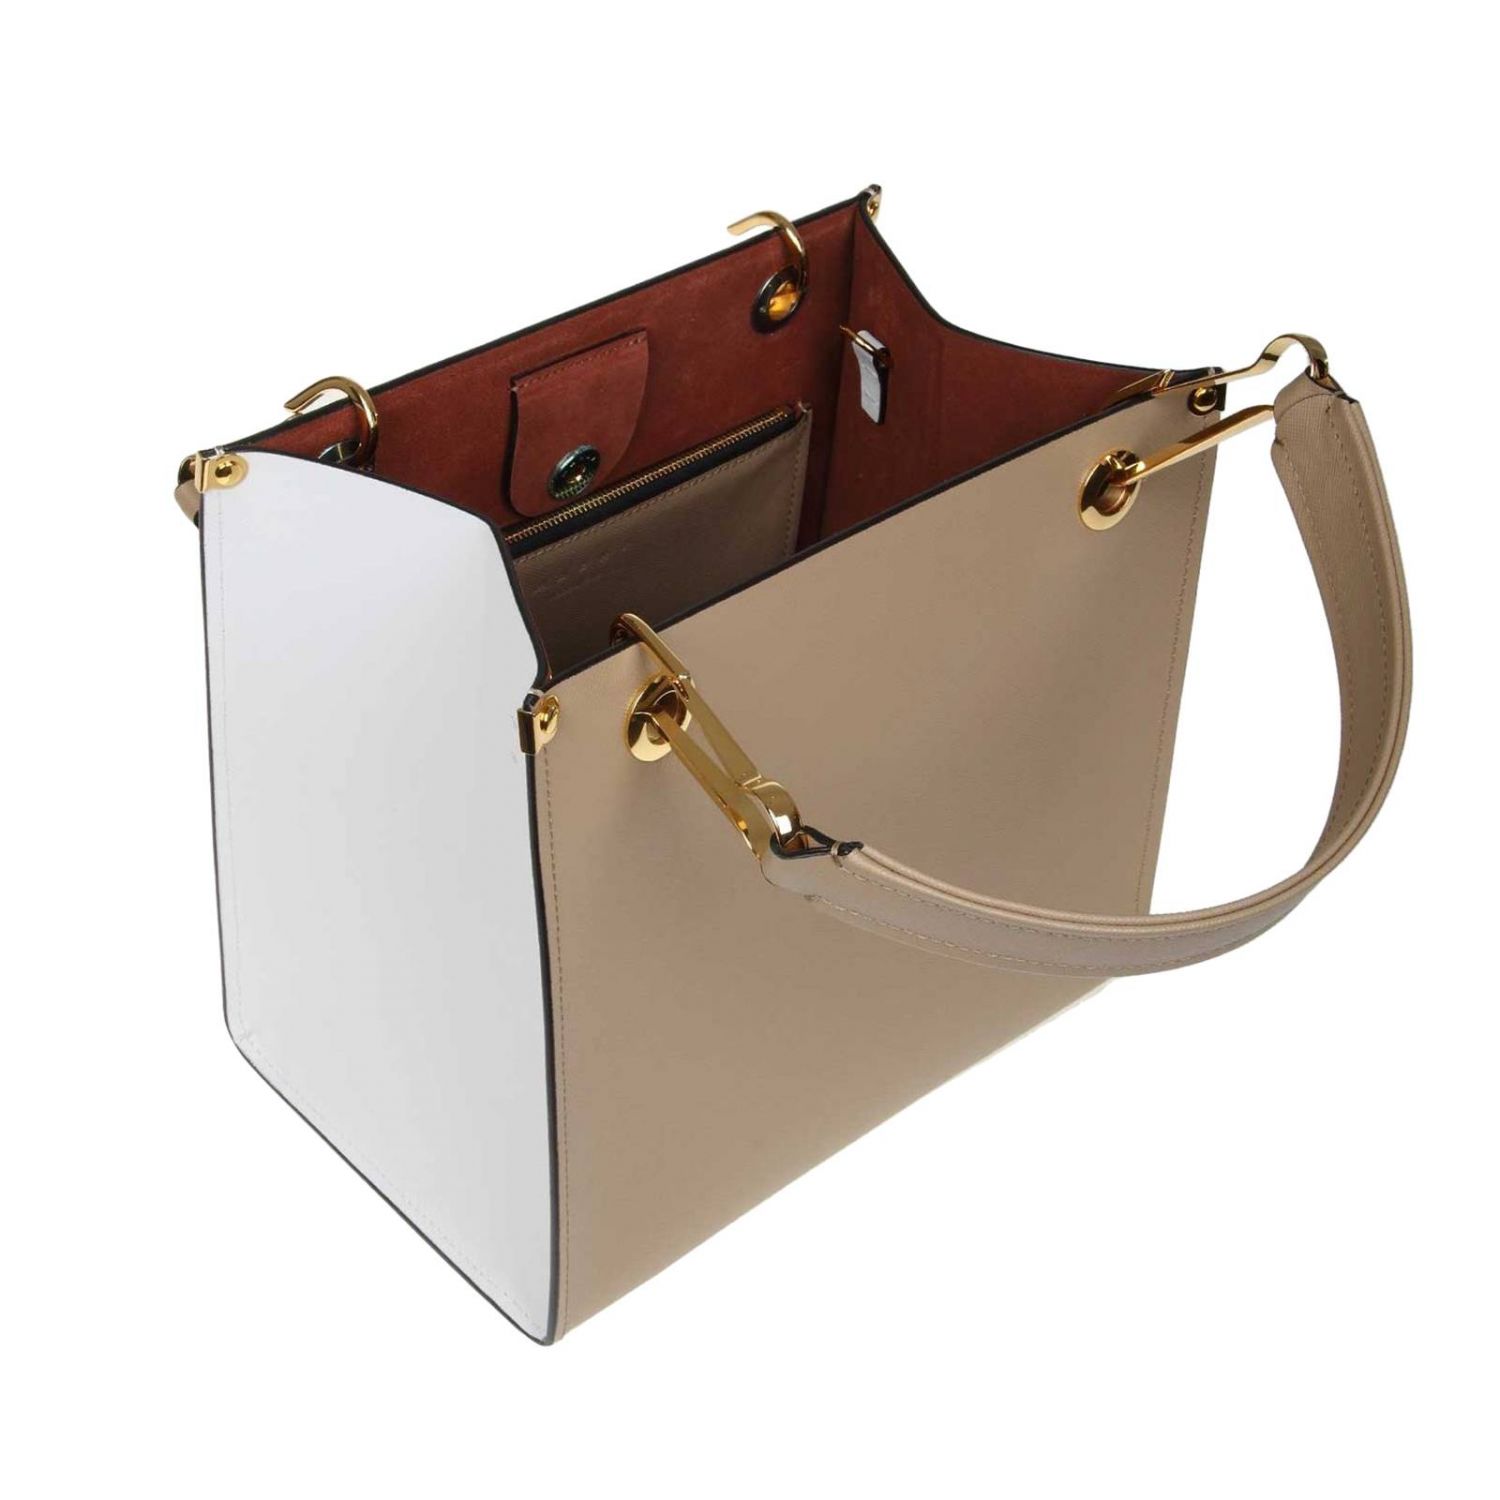 Marni Outlet: tote bag in bicolor leather with double handles | Tote